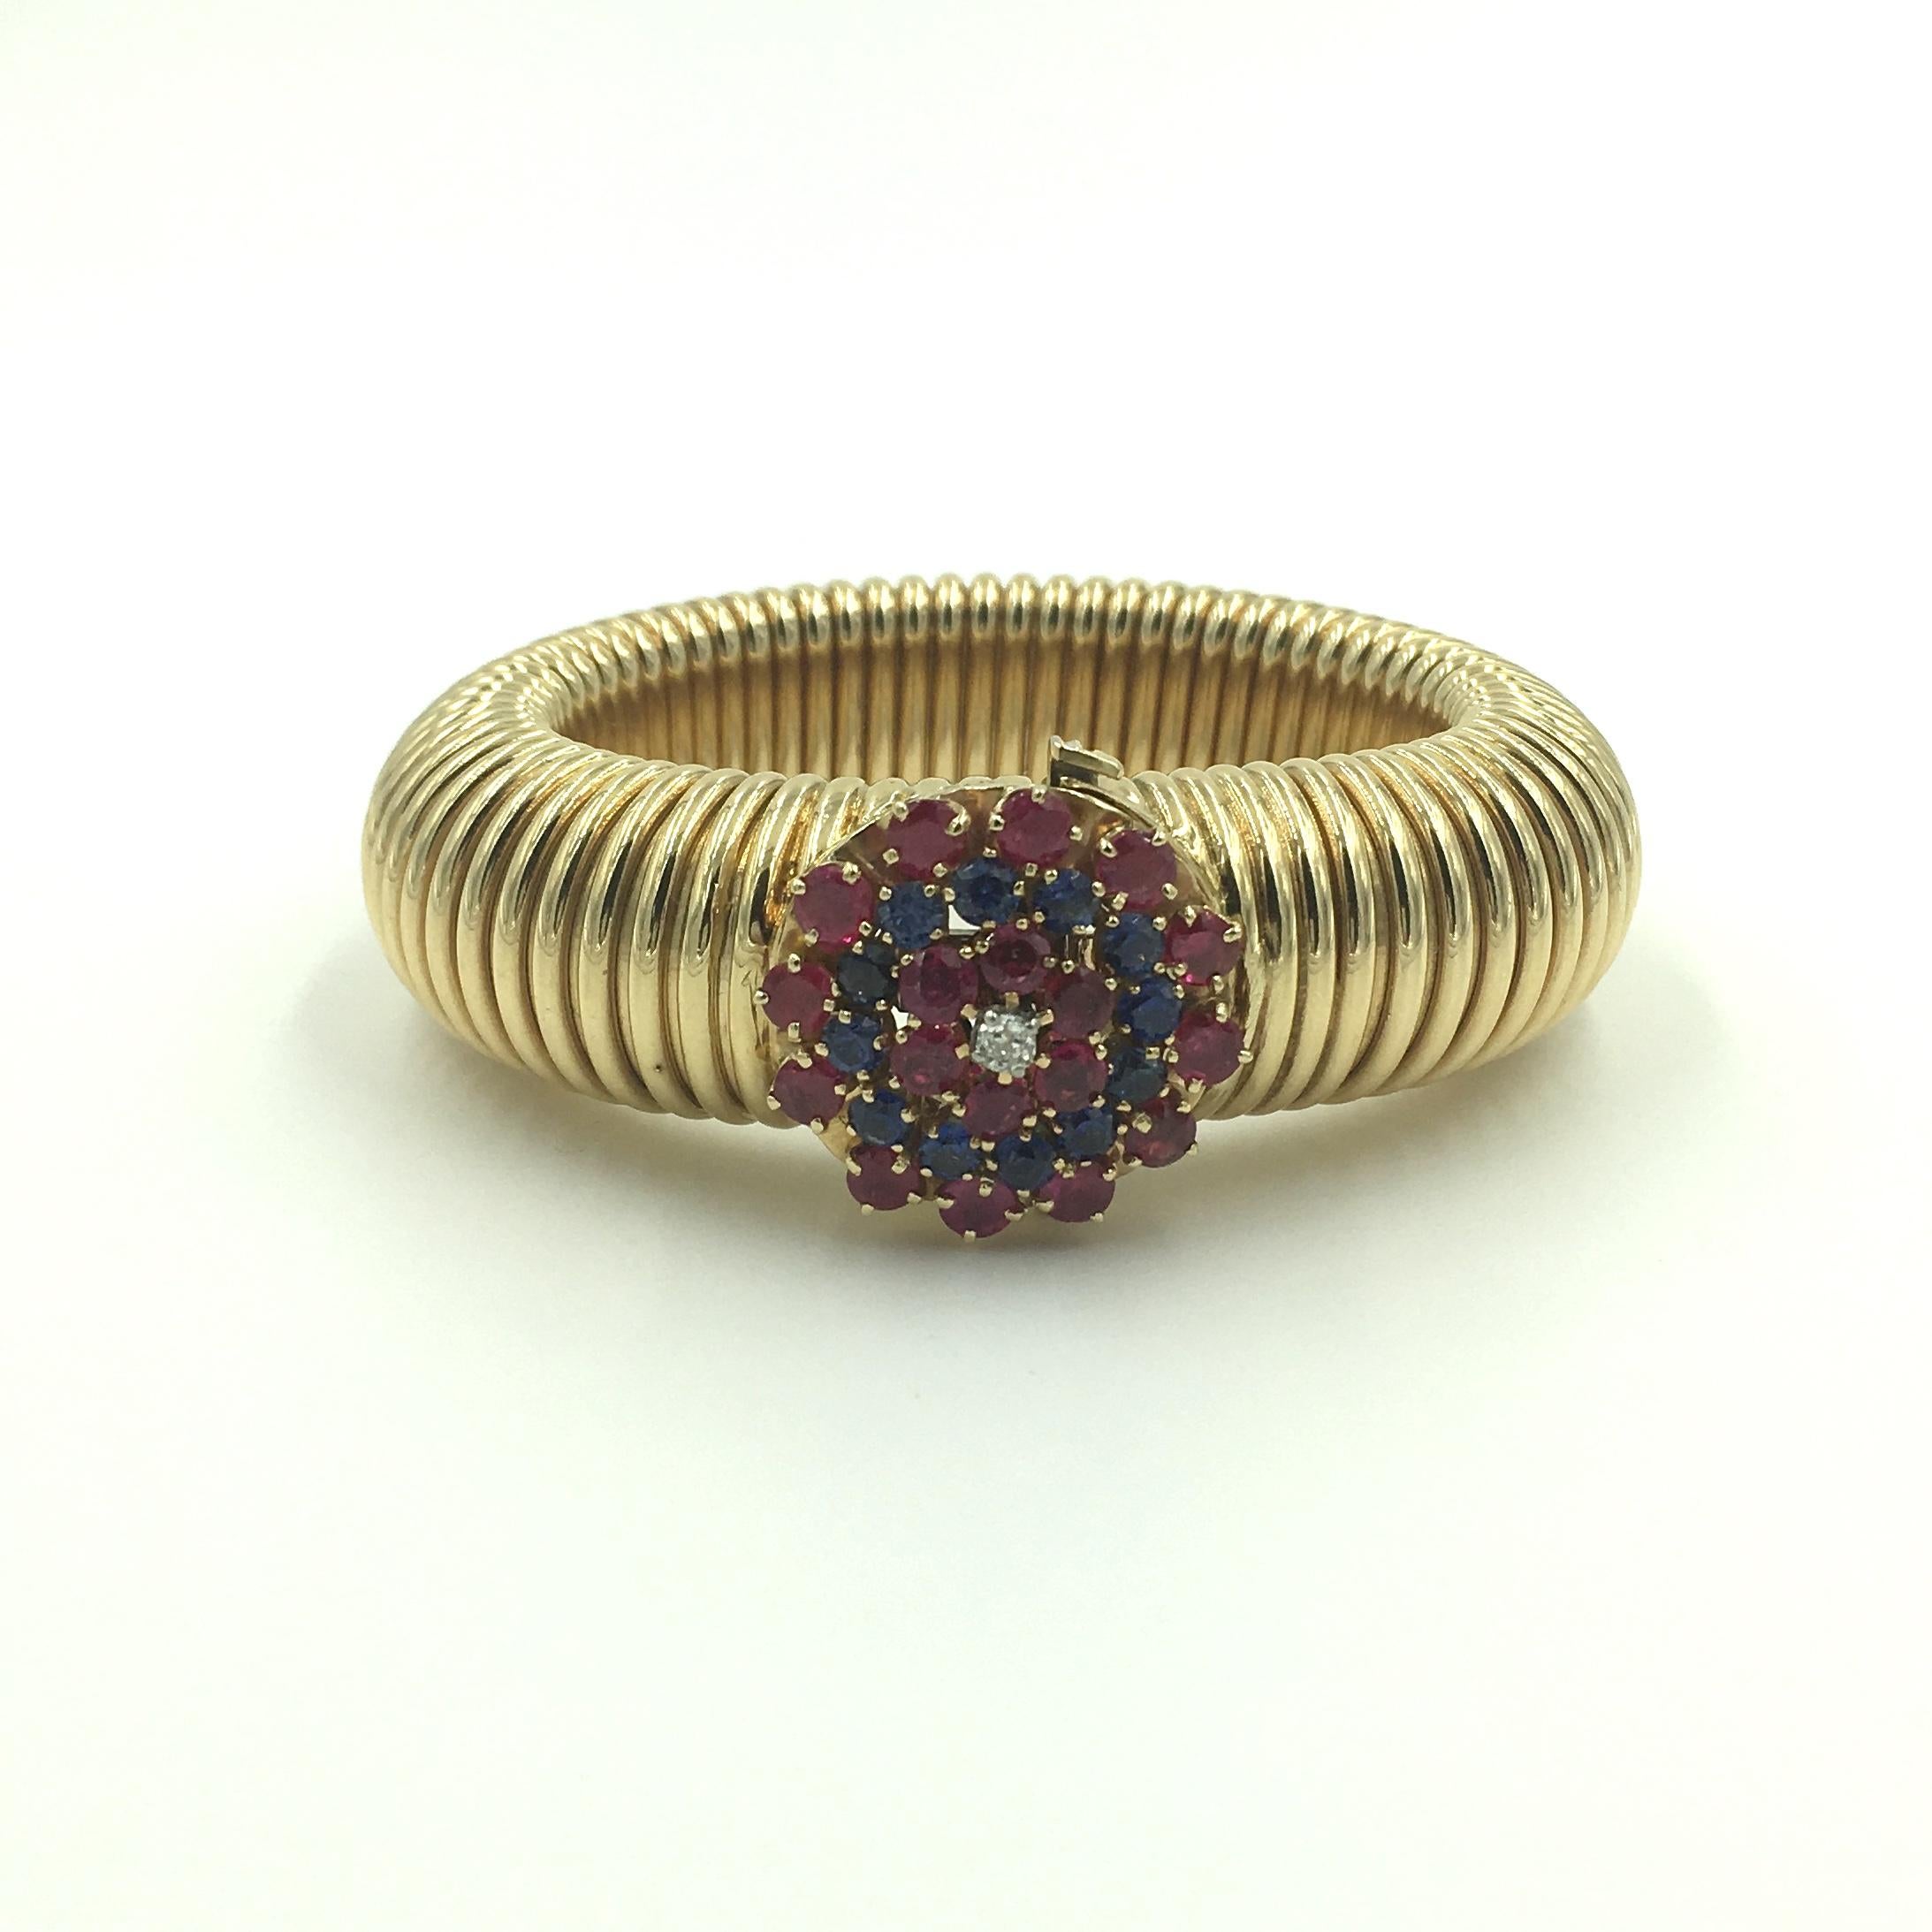 14 Karat Yellow Gold 1940’s Ruby, Sapphire and Diamond Tubogas Bracelet.  The clasp set with 18 Rubies totaling approximately 3.60 Carats, 12 Sapphires totaling approximately 1.70 Carats and 1 old mine diamond weighing approximately .12 carat.  The